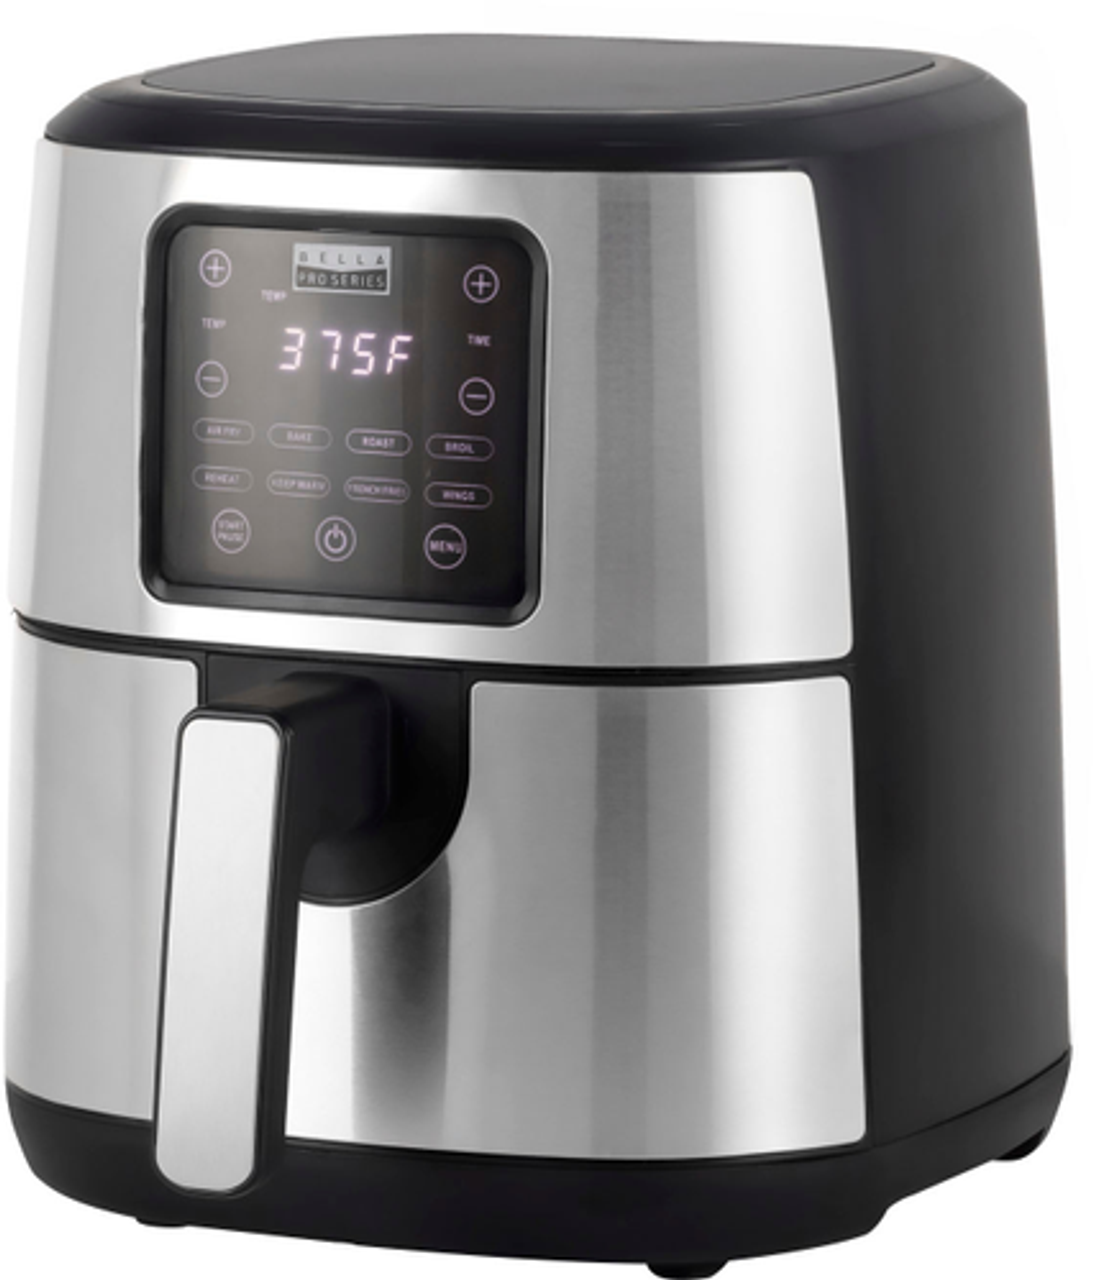 Bella Pro Series - 4.2-qt. Digital Air Fryer with Stainless Steel Finish - Stainless Steel